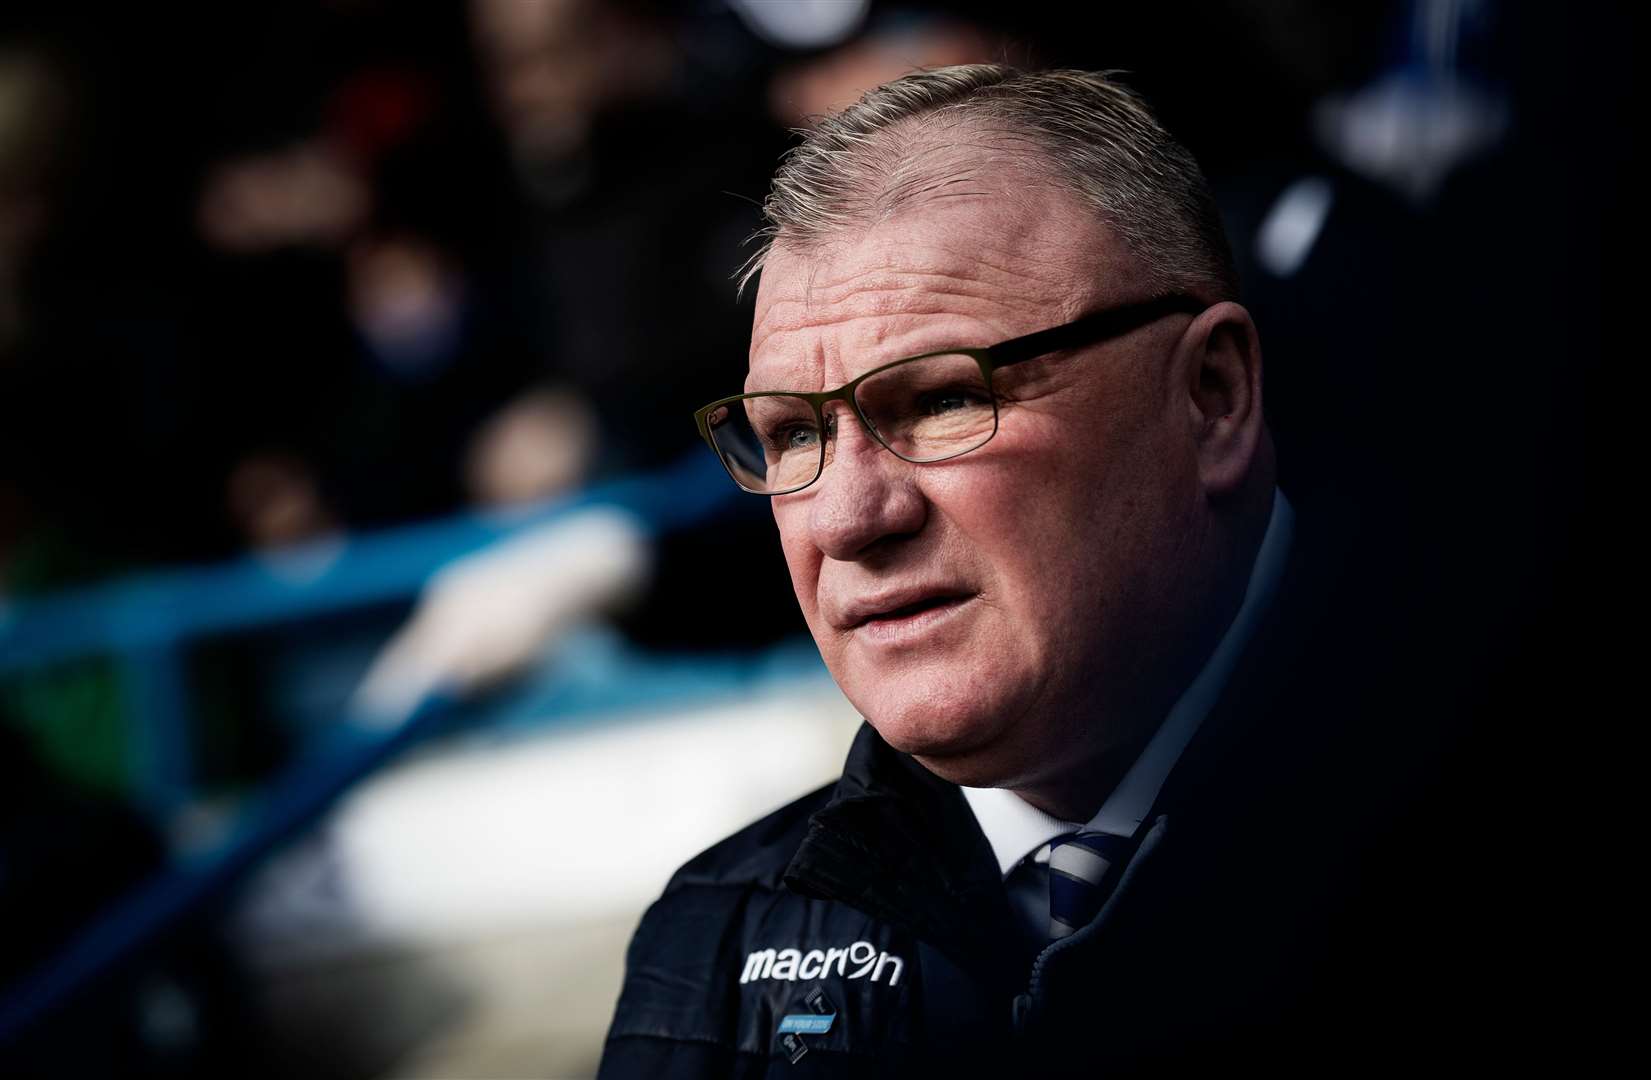 Gillingham manager Steve Evans has called on Rick Parry and the EFL to take action